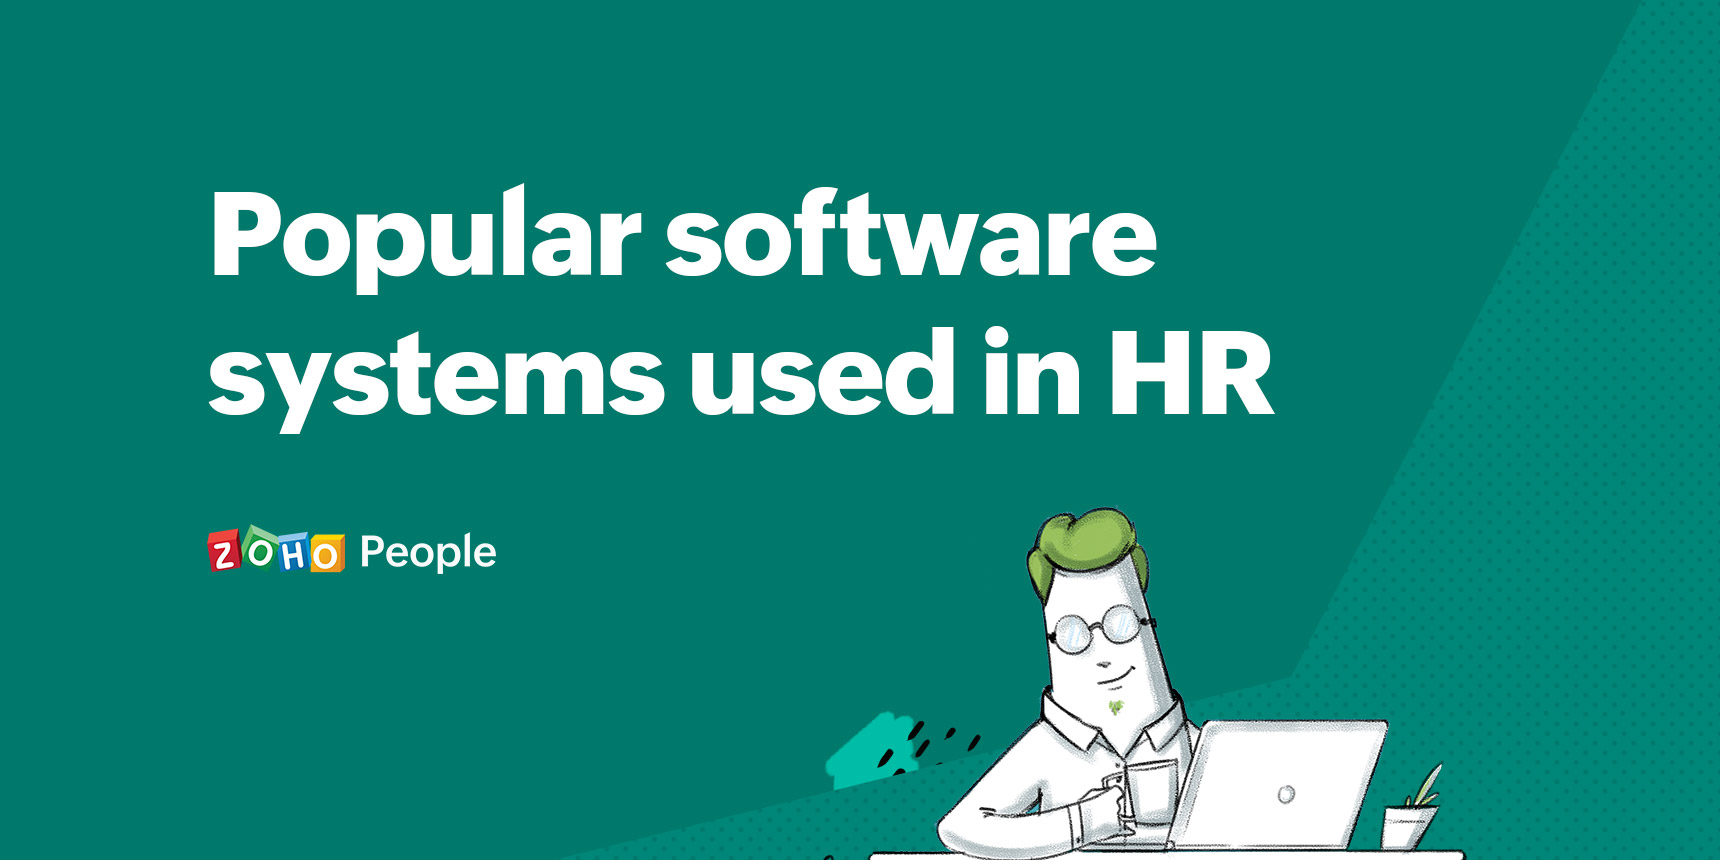 Popular software systems used by HR professionals